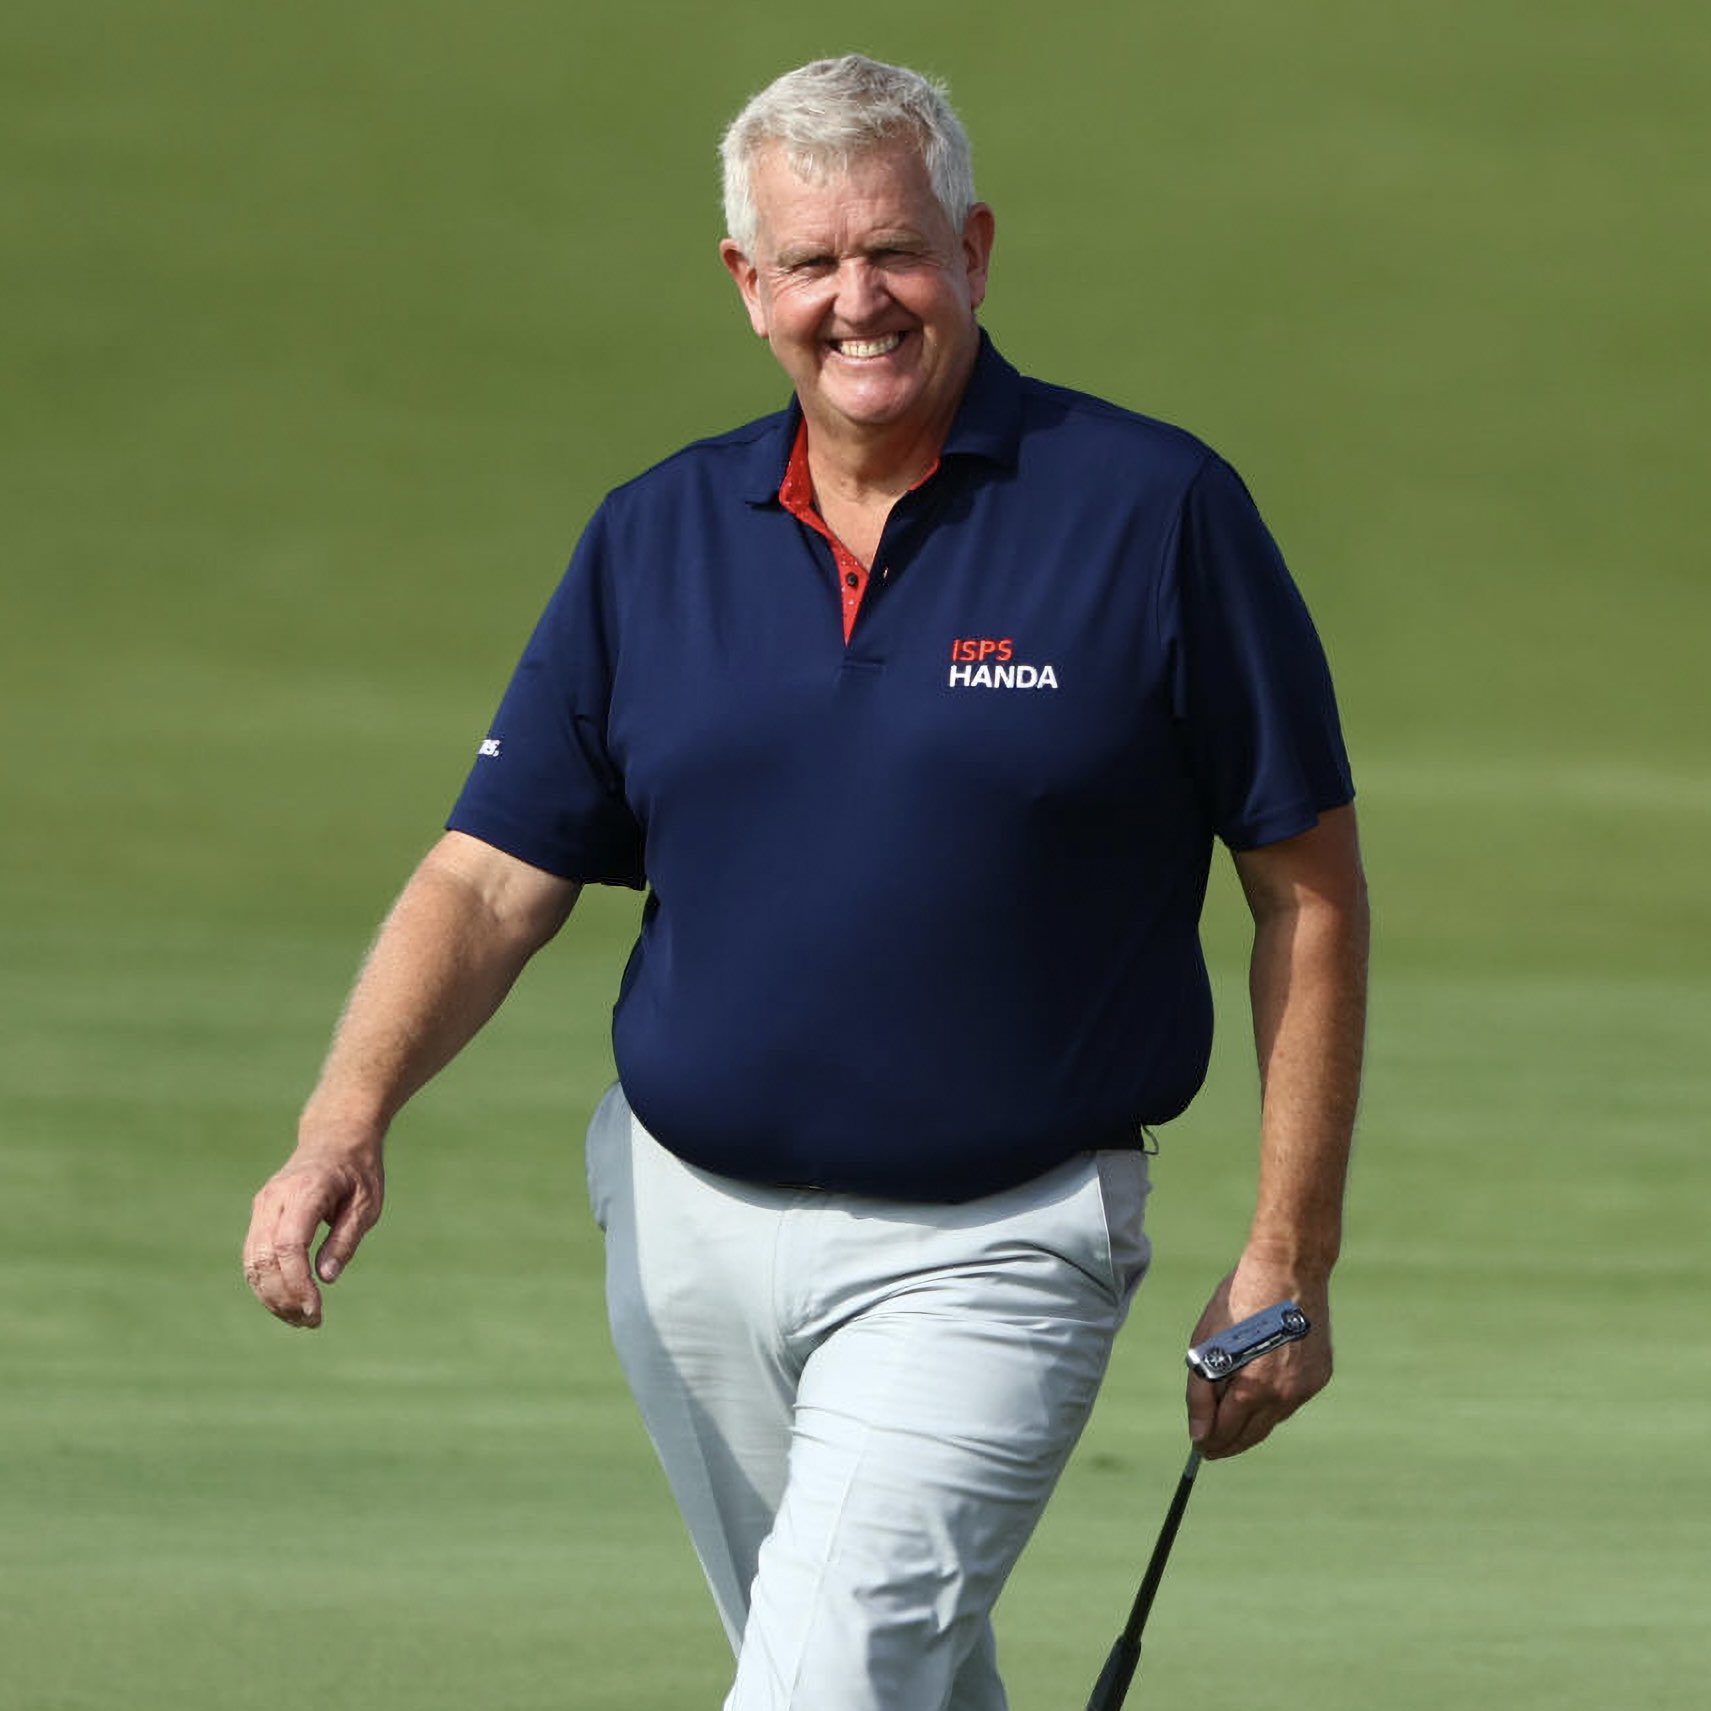 Wishing our ambassador Colin Montgomerie a very happy birthday! Hope you have an amazing day  